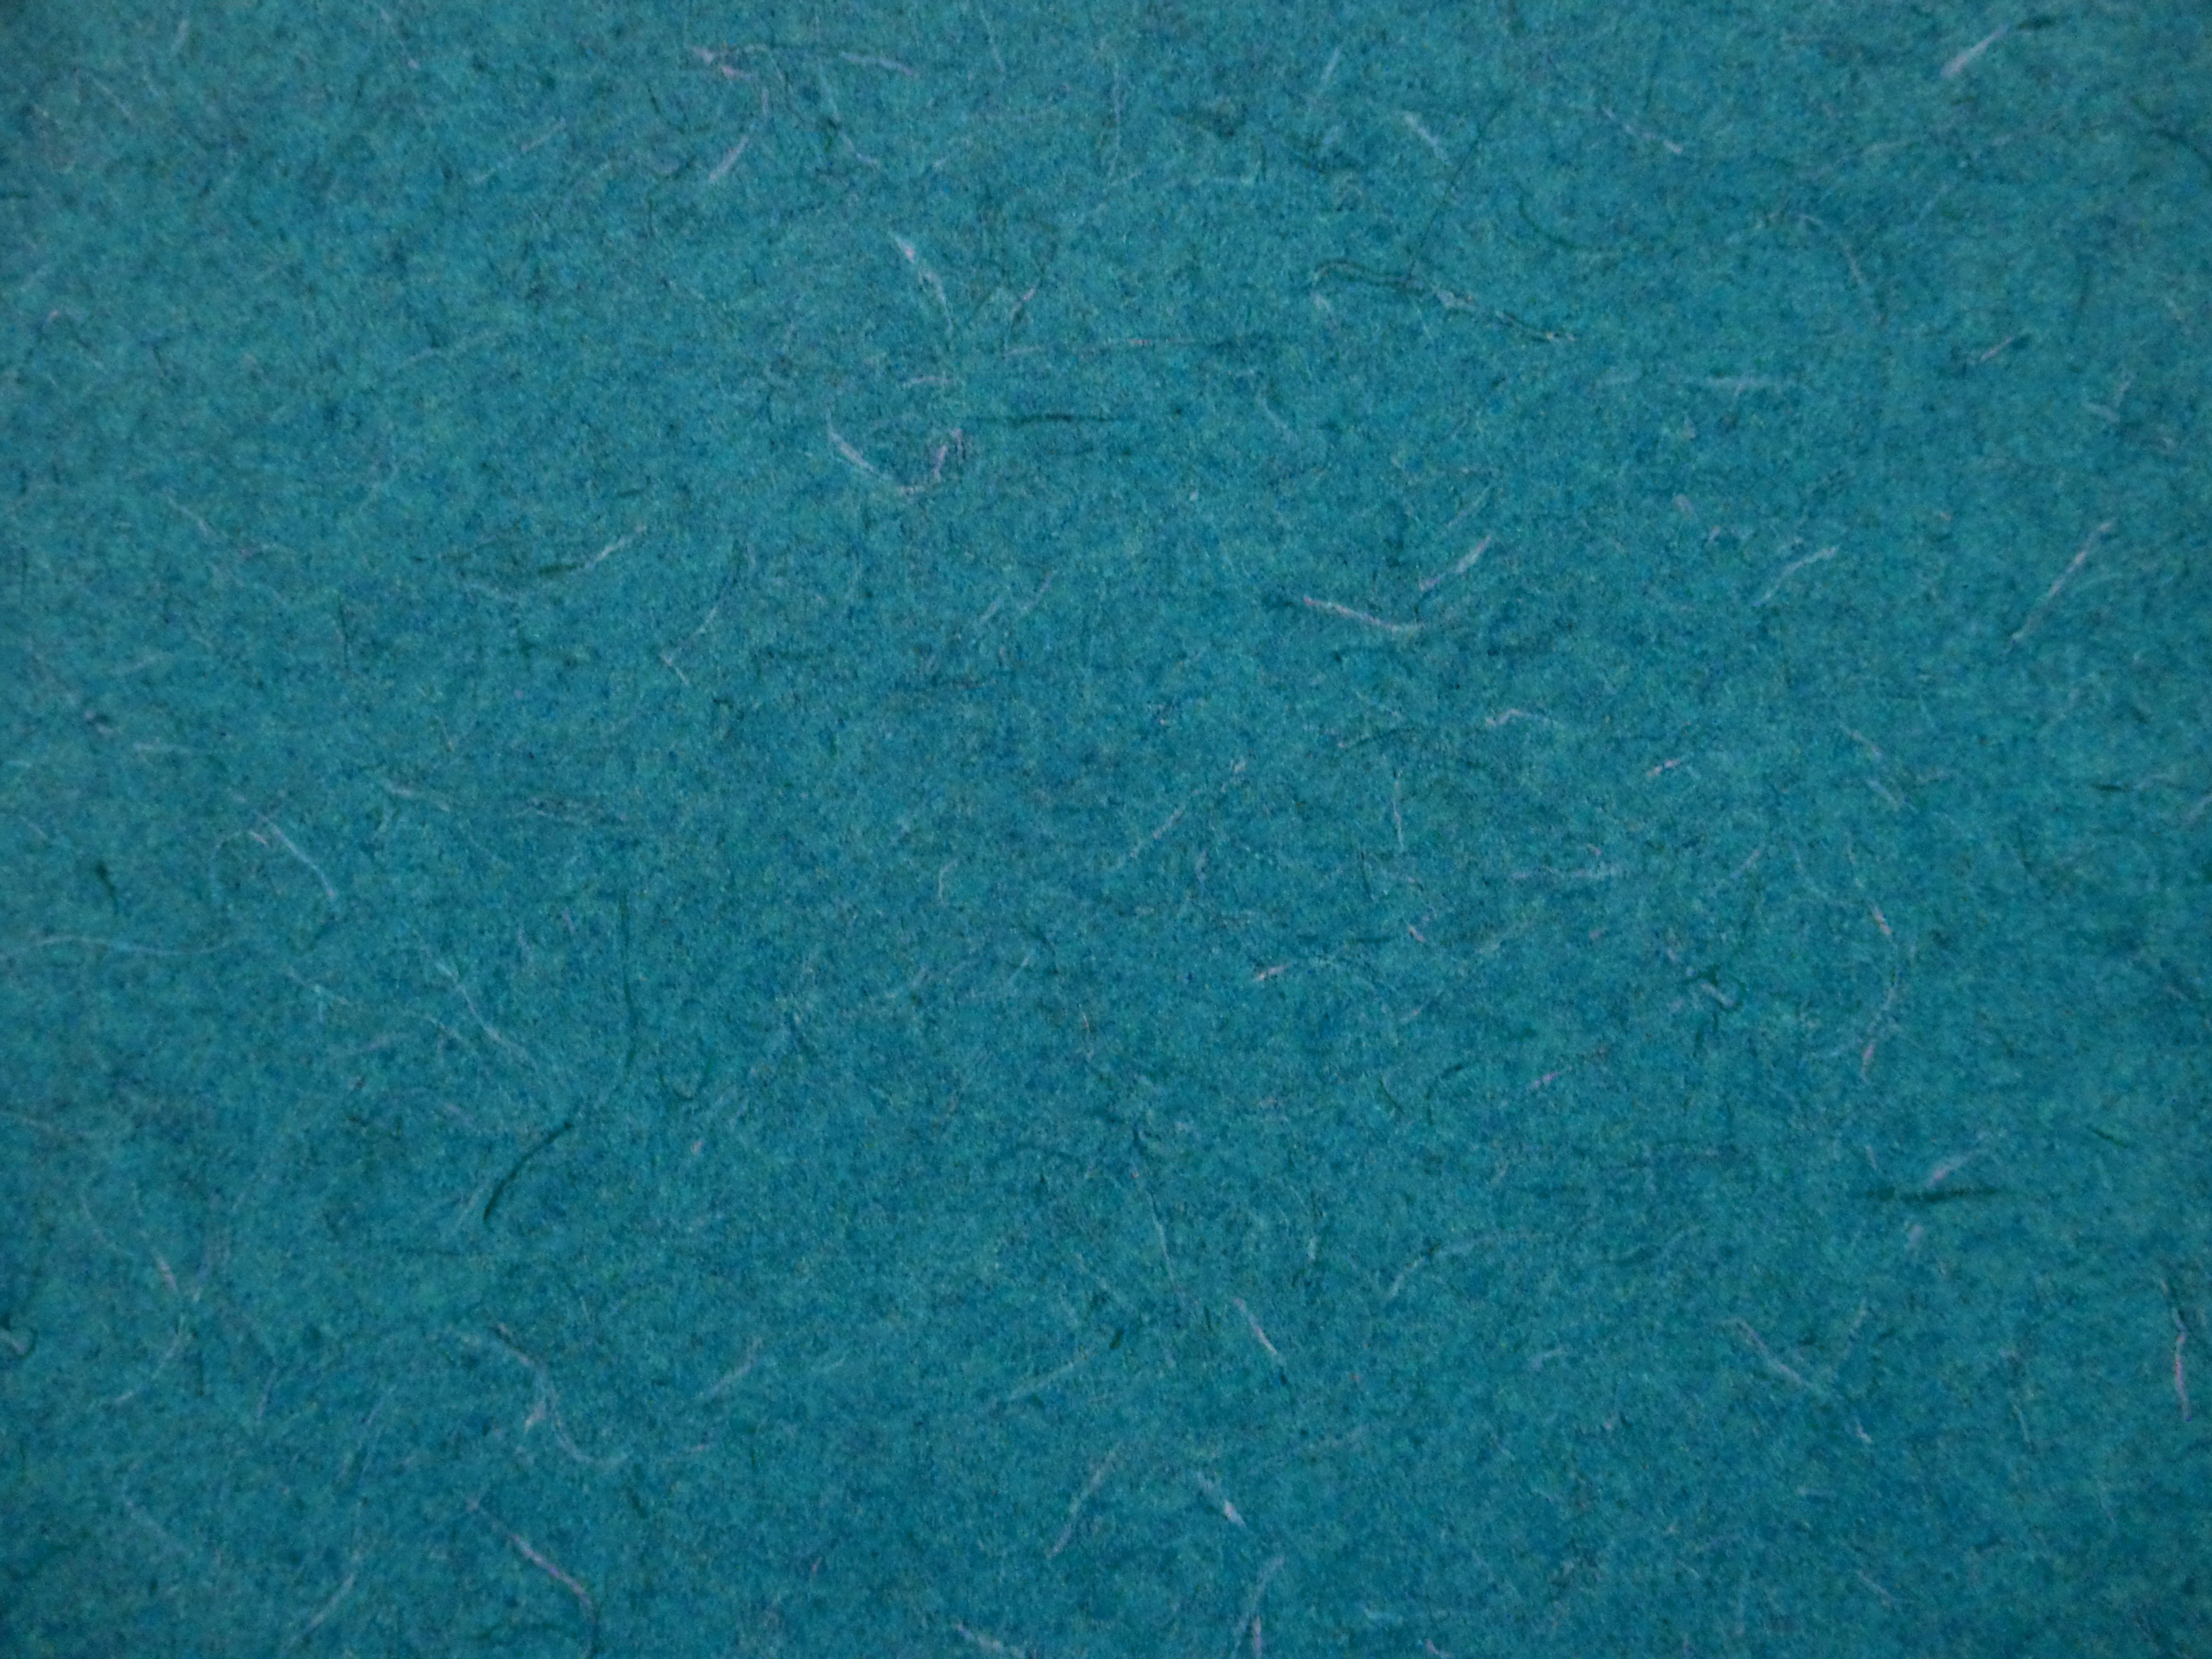 Teal Abstract Pattern Laminate Countertop Texture Picture Free